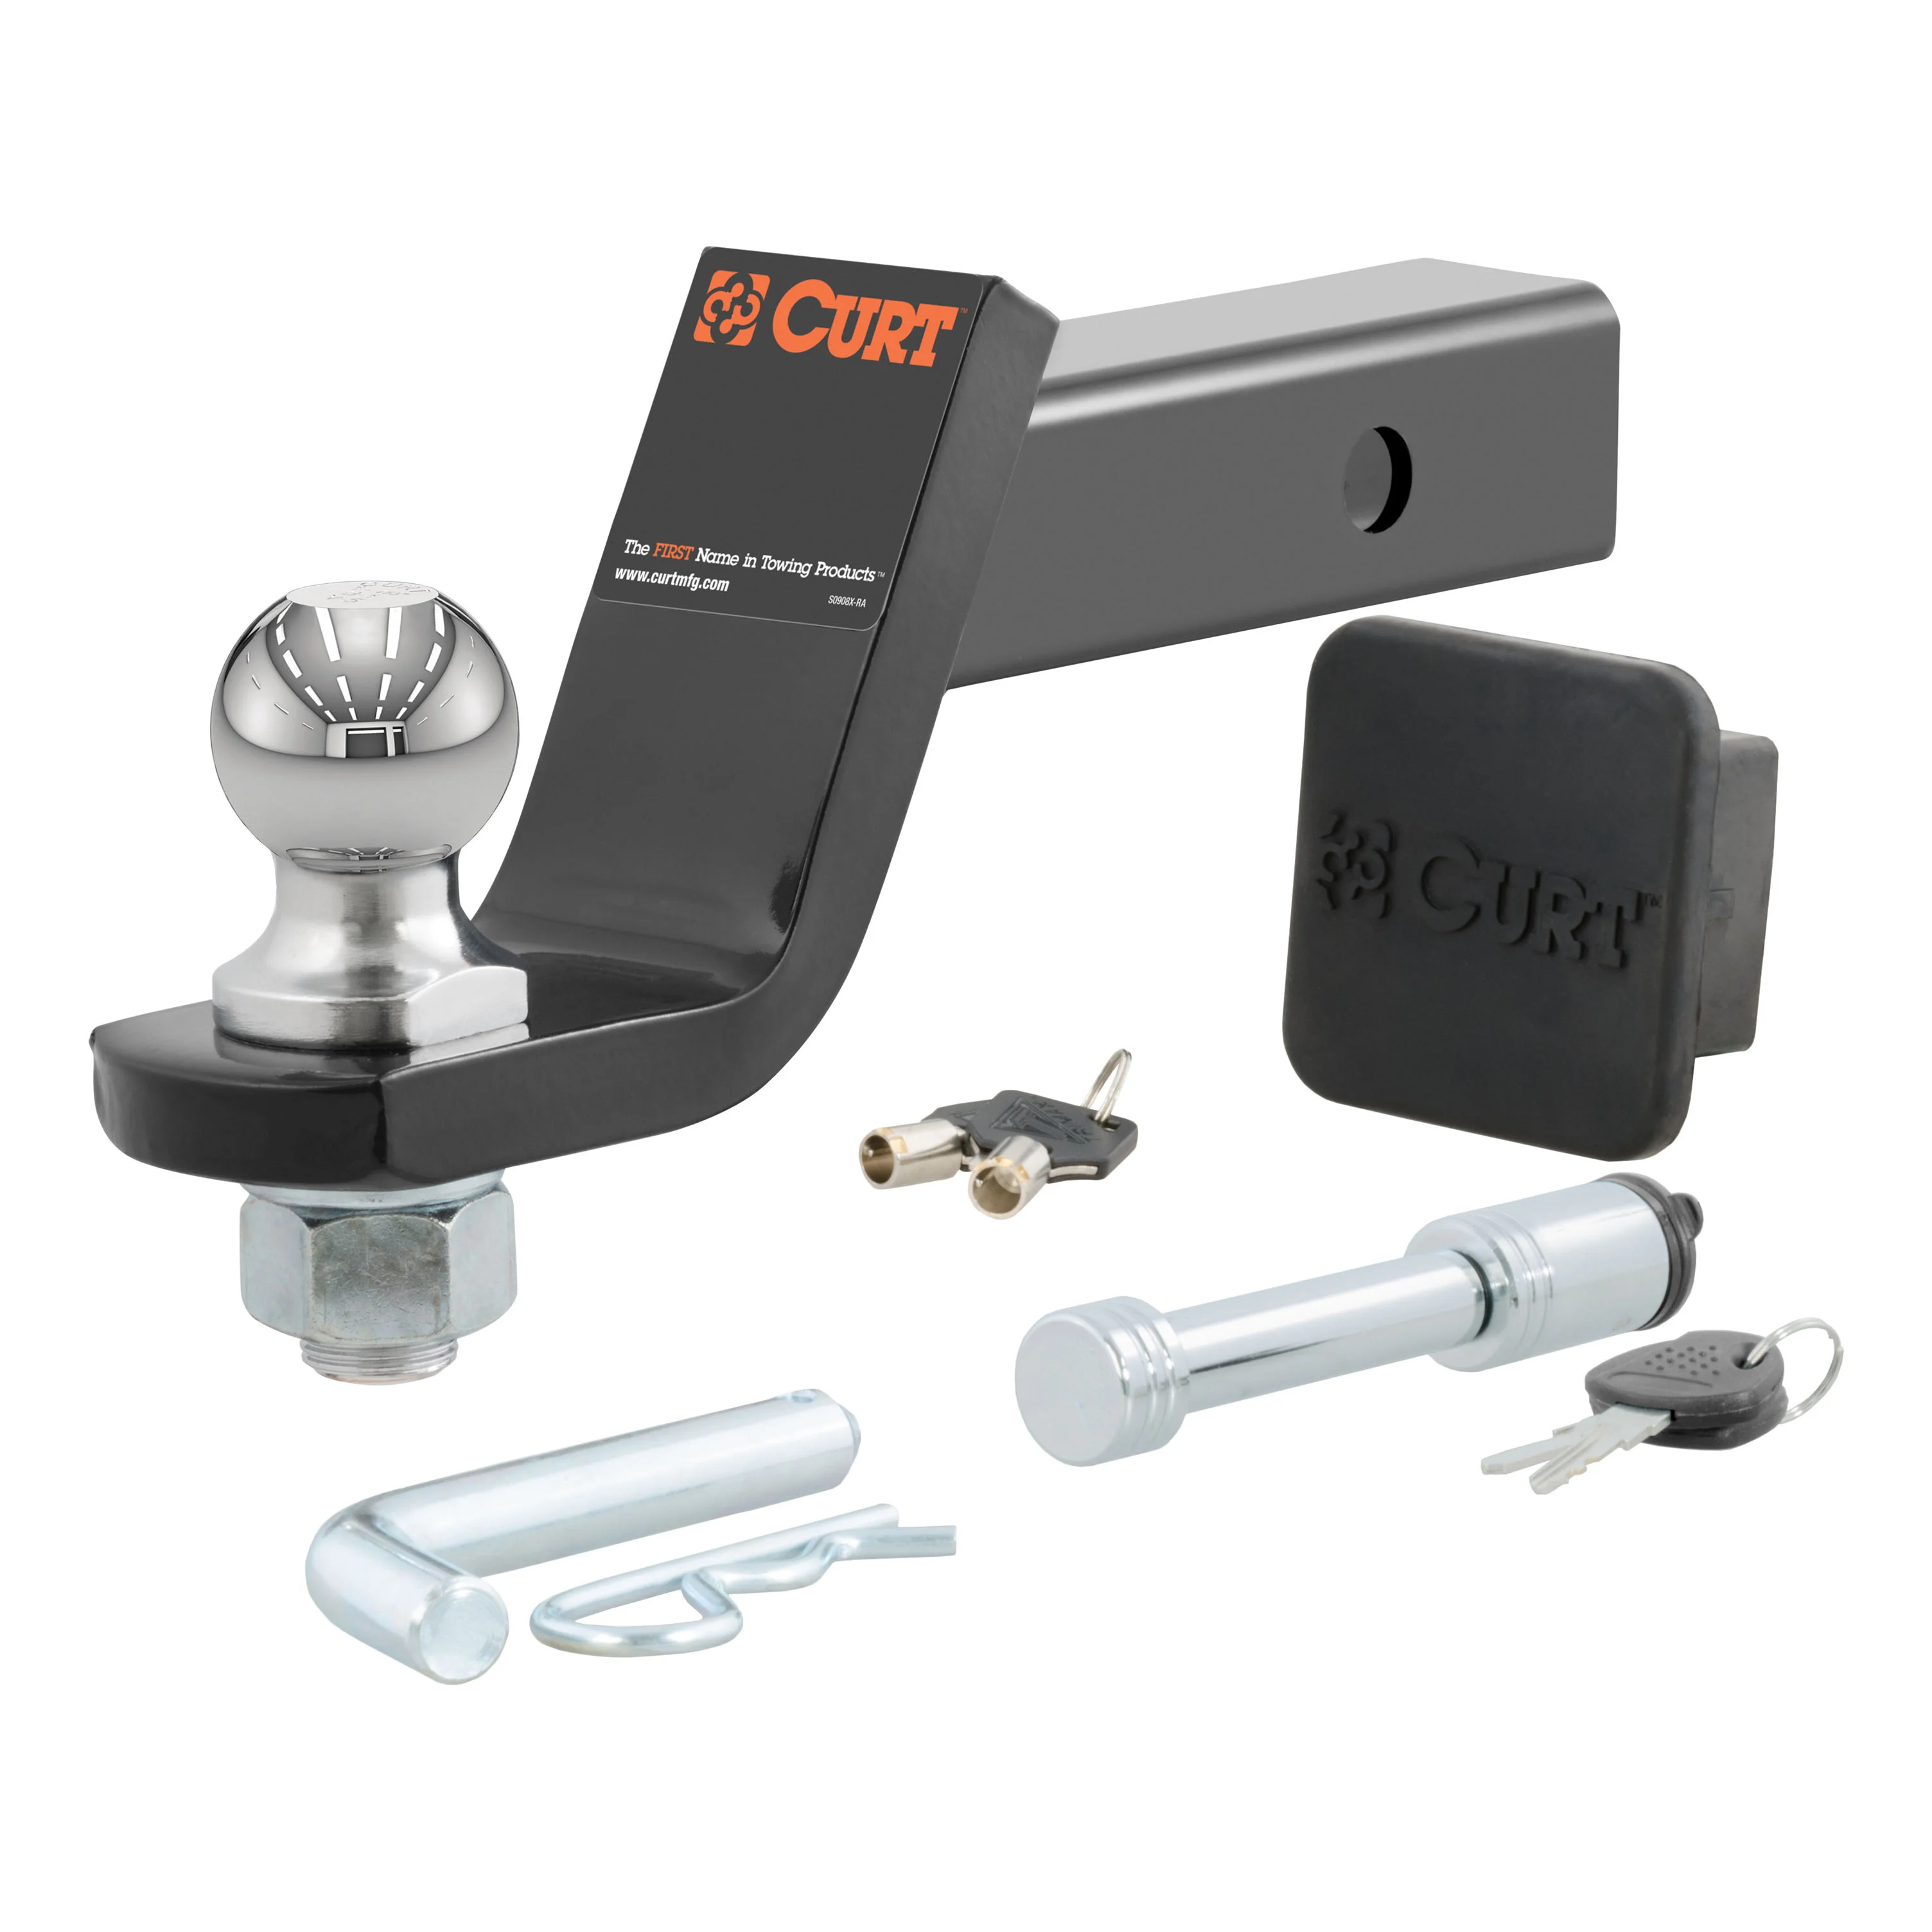 OEM 2011 Dodge Durango Curt Towing Starter Kit 2-inch ball, 2-inch shank with 4-inch drop (Part #68628506AA)